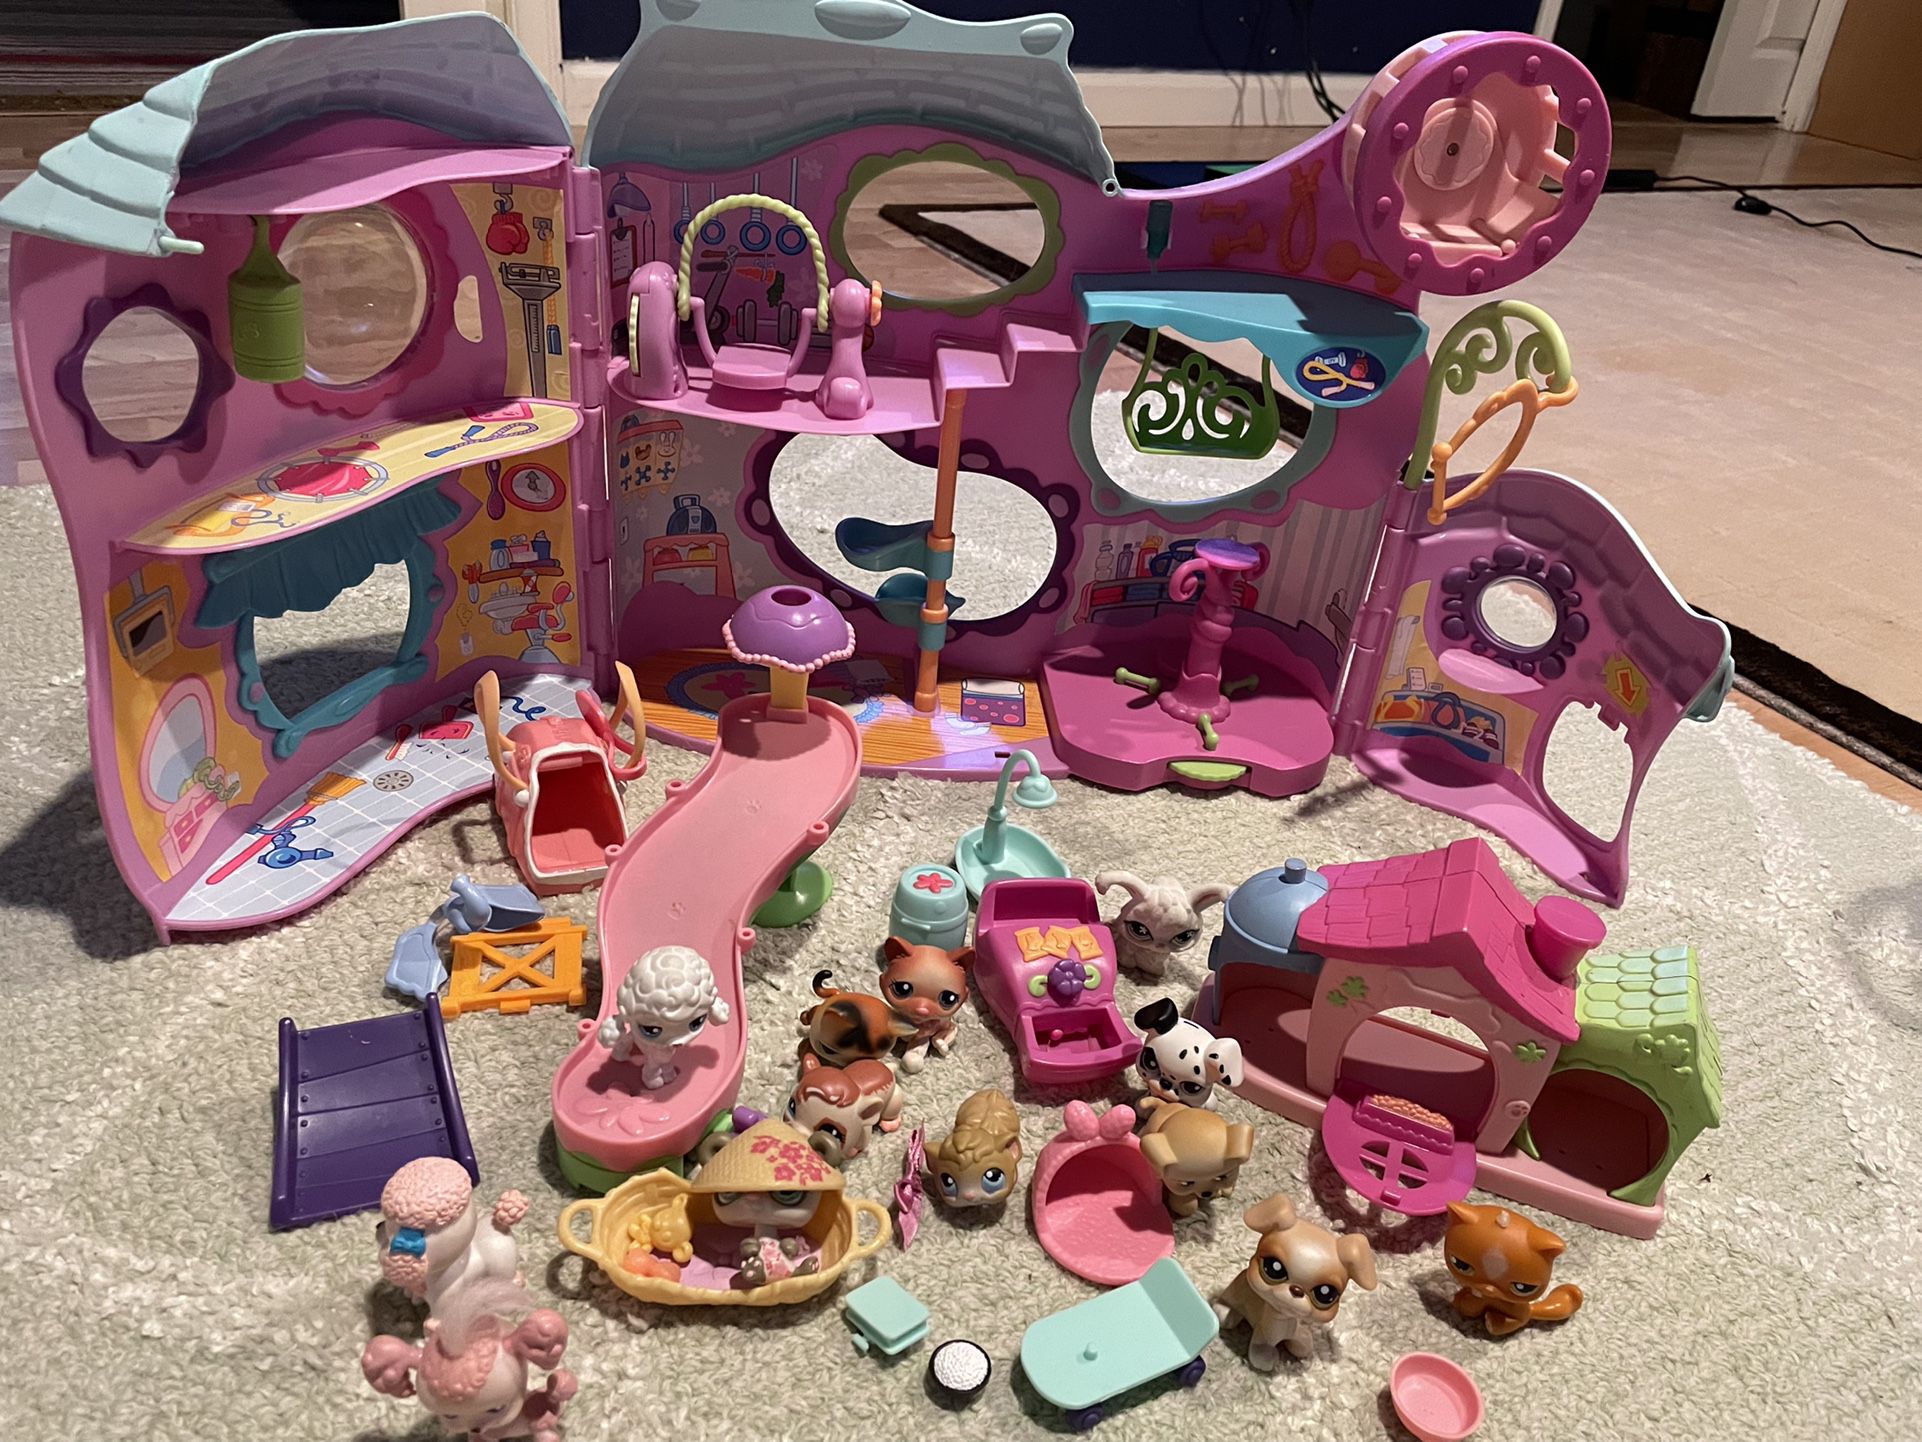 Littlest pet shop houses for Sale in Chesapeake, VA - OfferUp